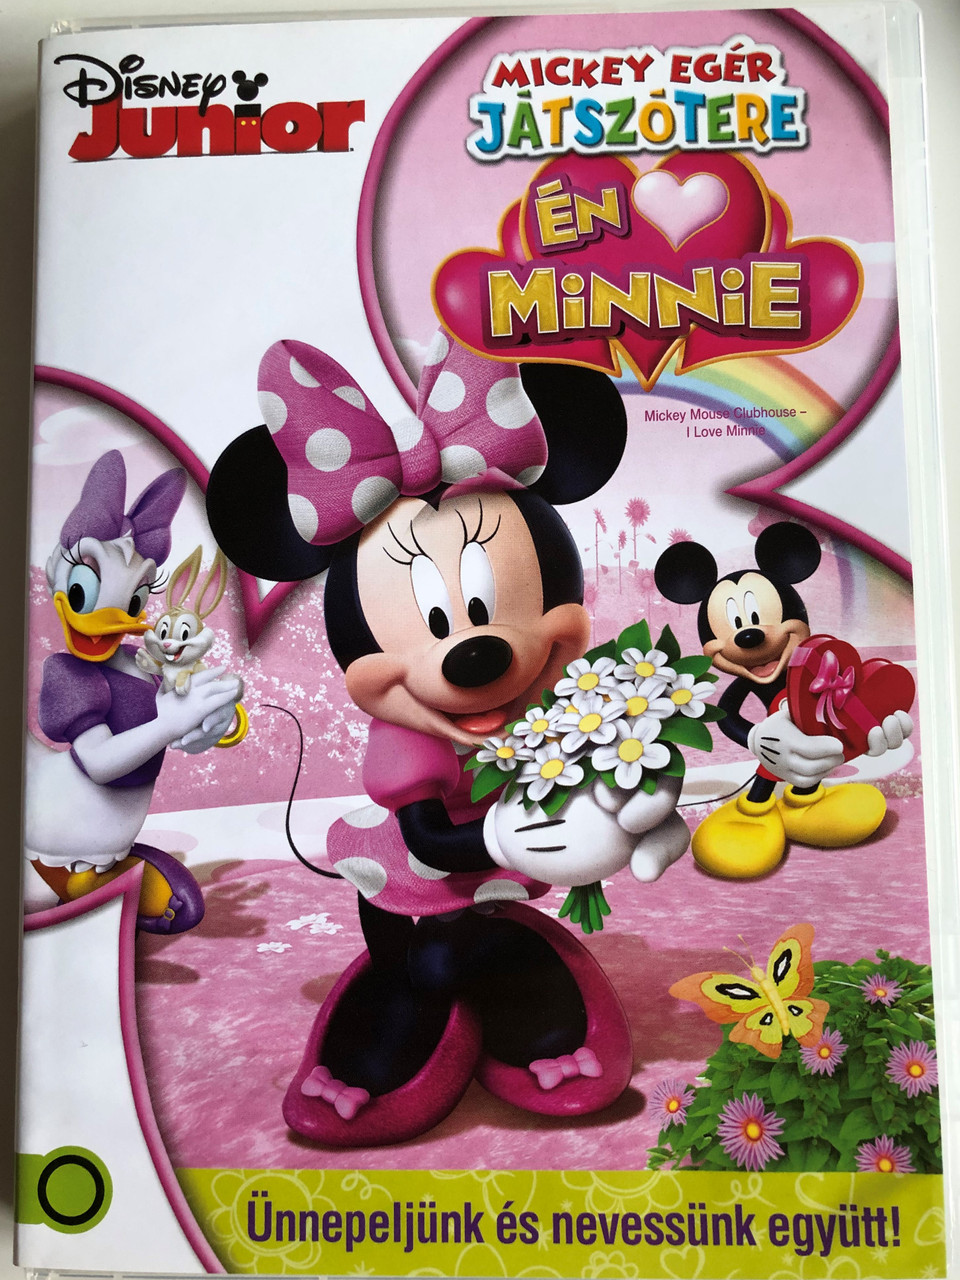 Mickey Mouse Clubhouse - I Love Minnie DVD 2013 Mickey Egér Játszótere / 4  Episodes on Disc - Bible in My Language